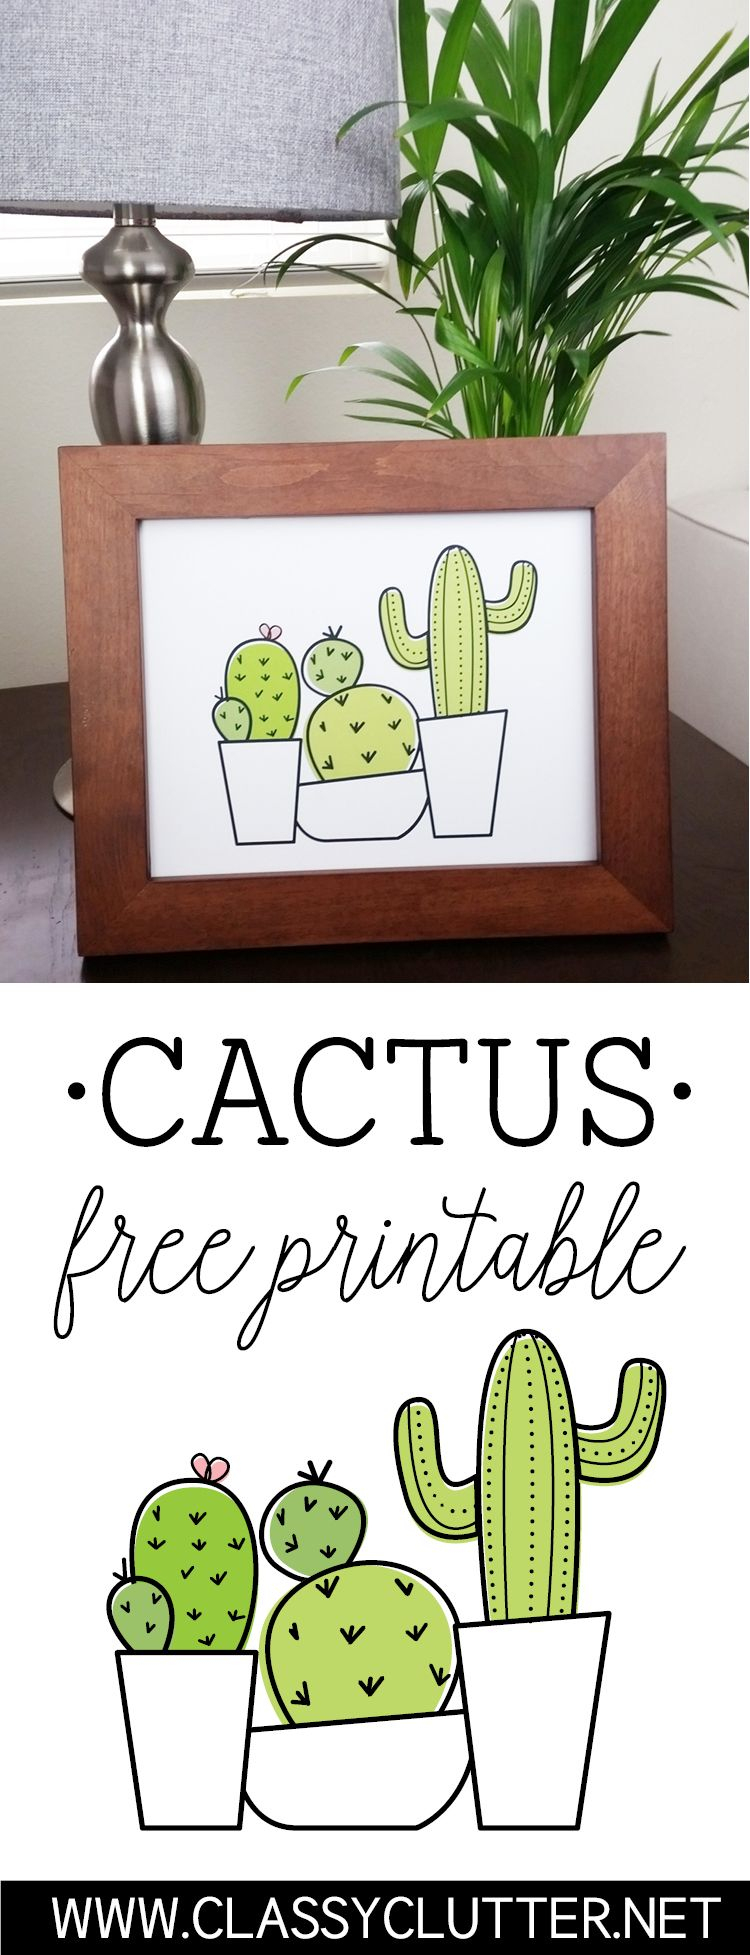 Free Cactus Printable | Classy Clutter Blog | Pinterest | Printables - Free Printable Cactus